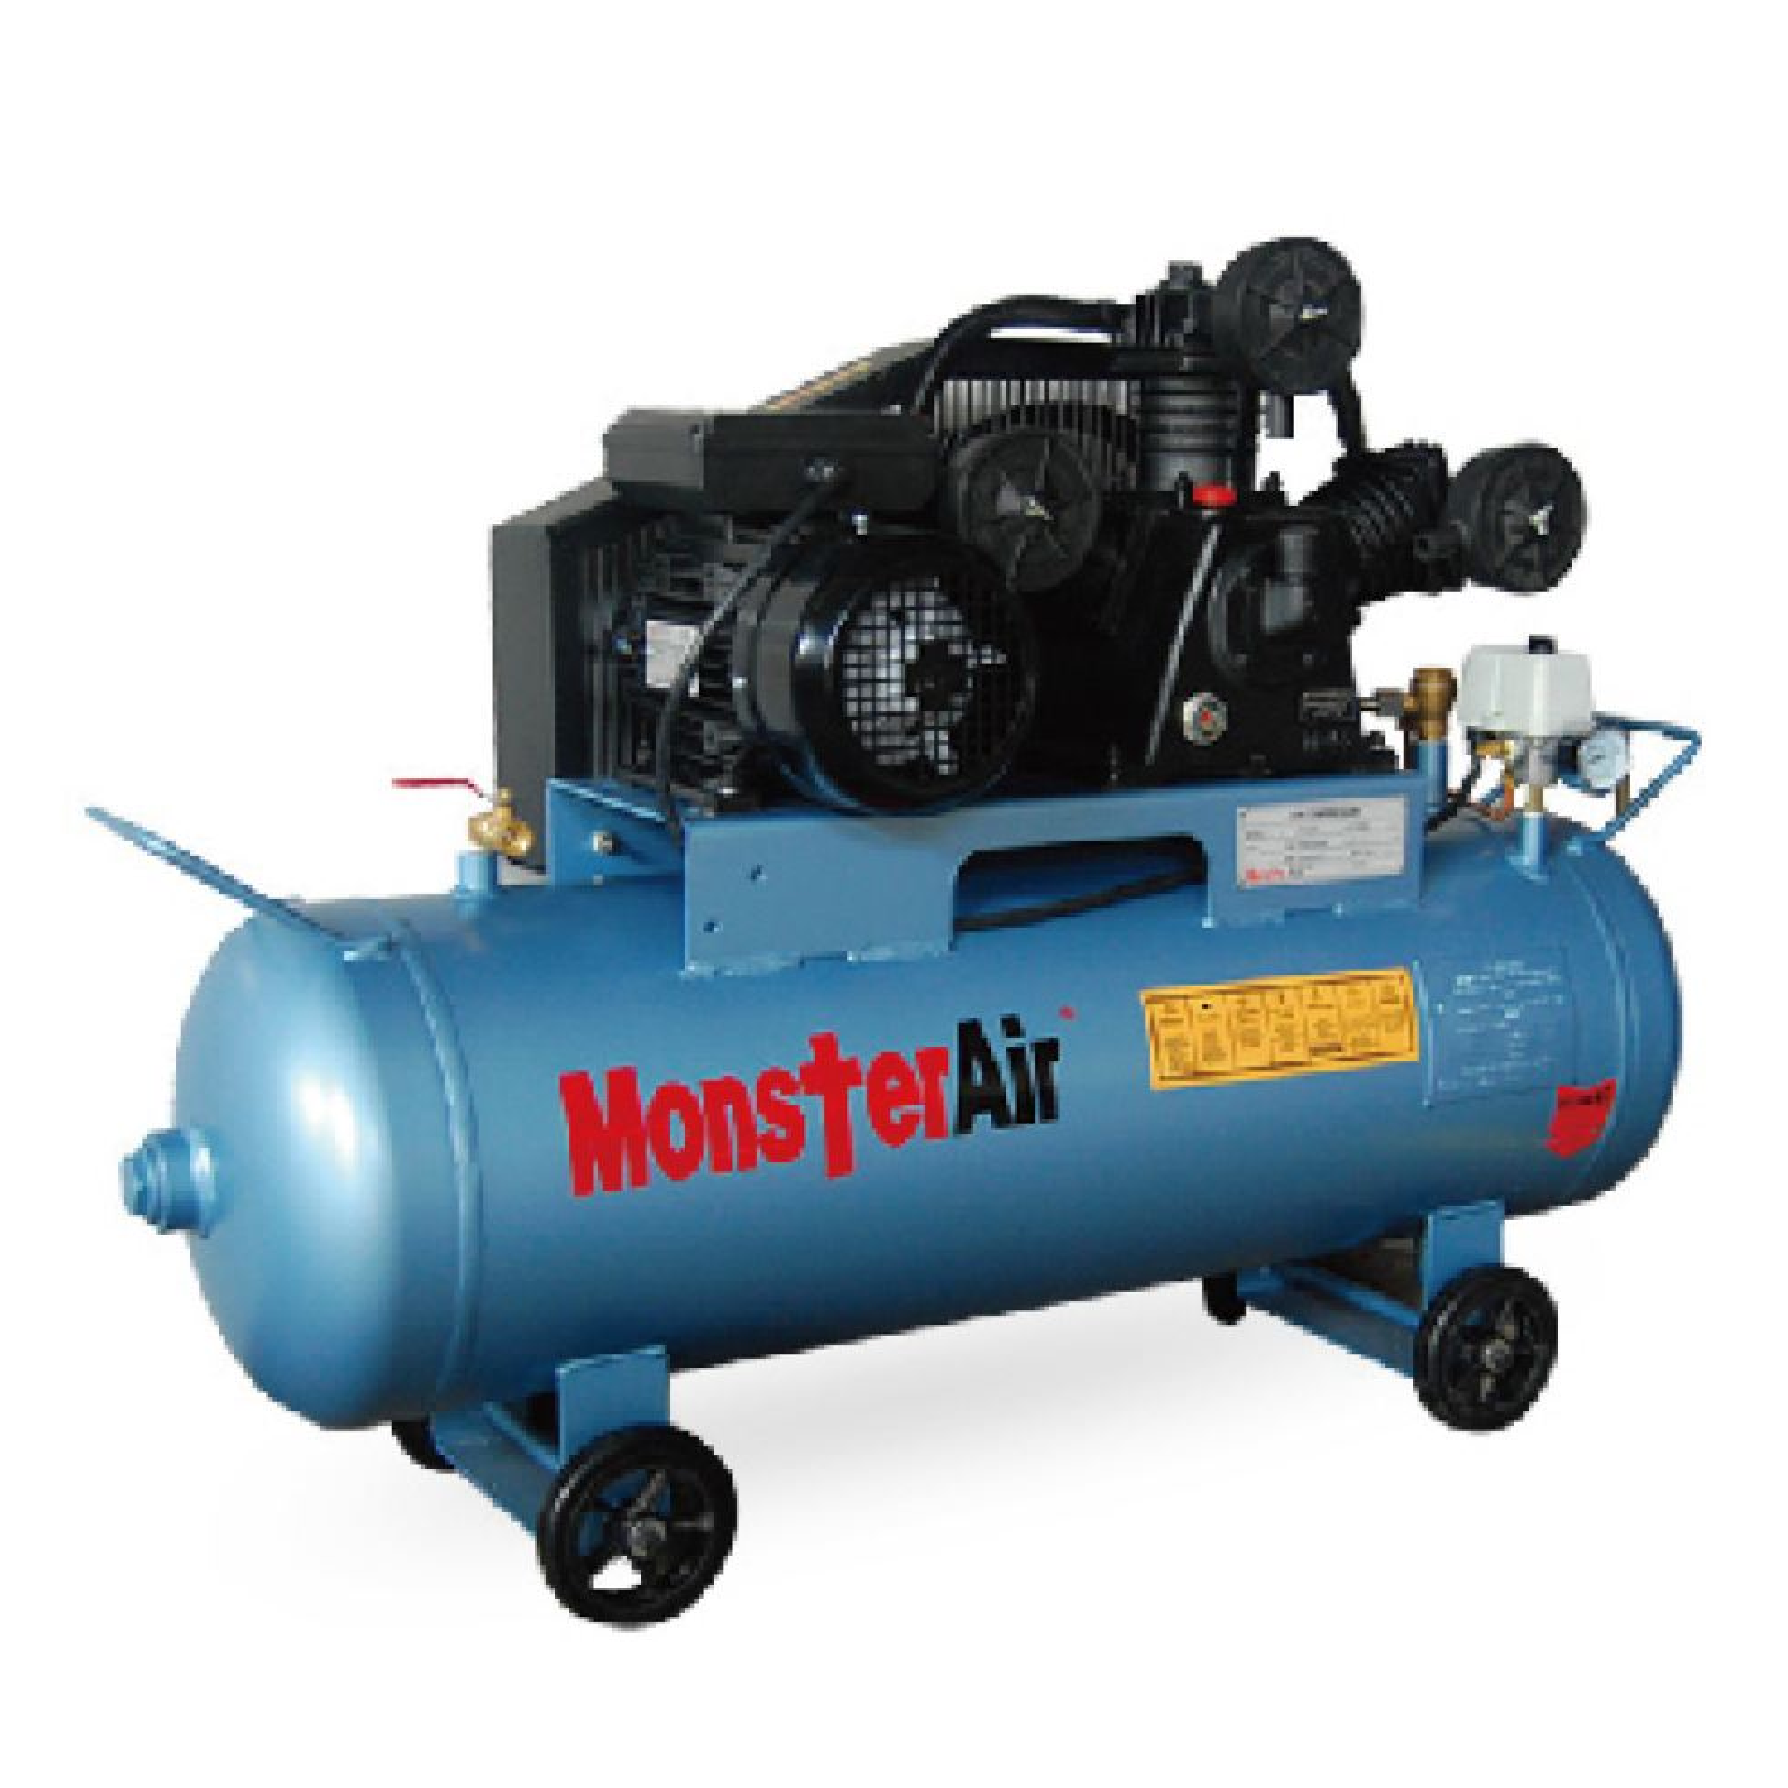 MonsterAir 15HP 400L 3 Phase (415V) Heavy Duty Air Compressor FS150-400H With MOM Certificate